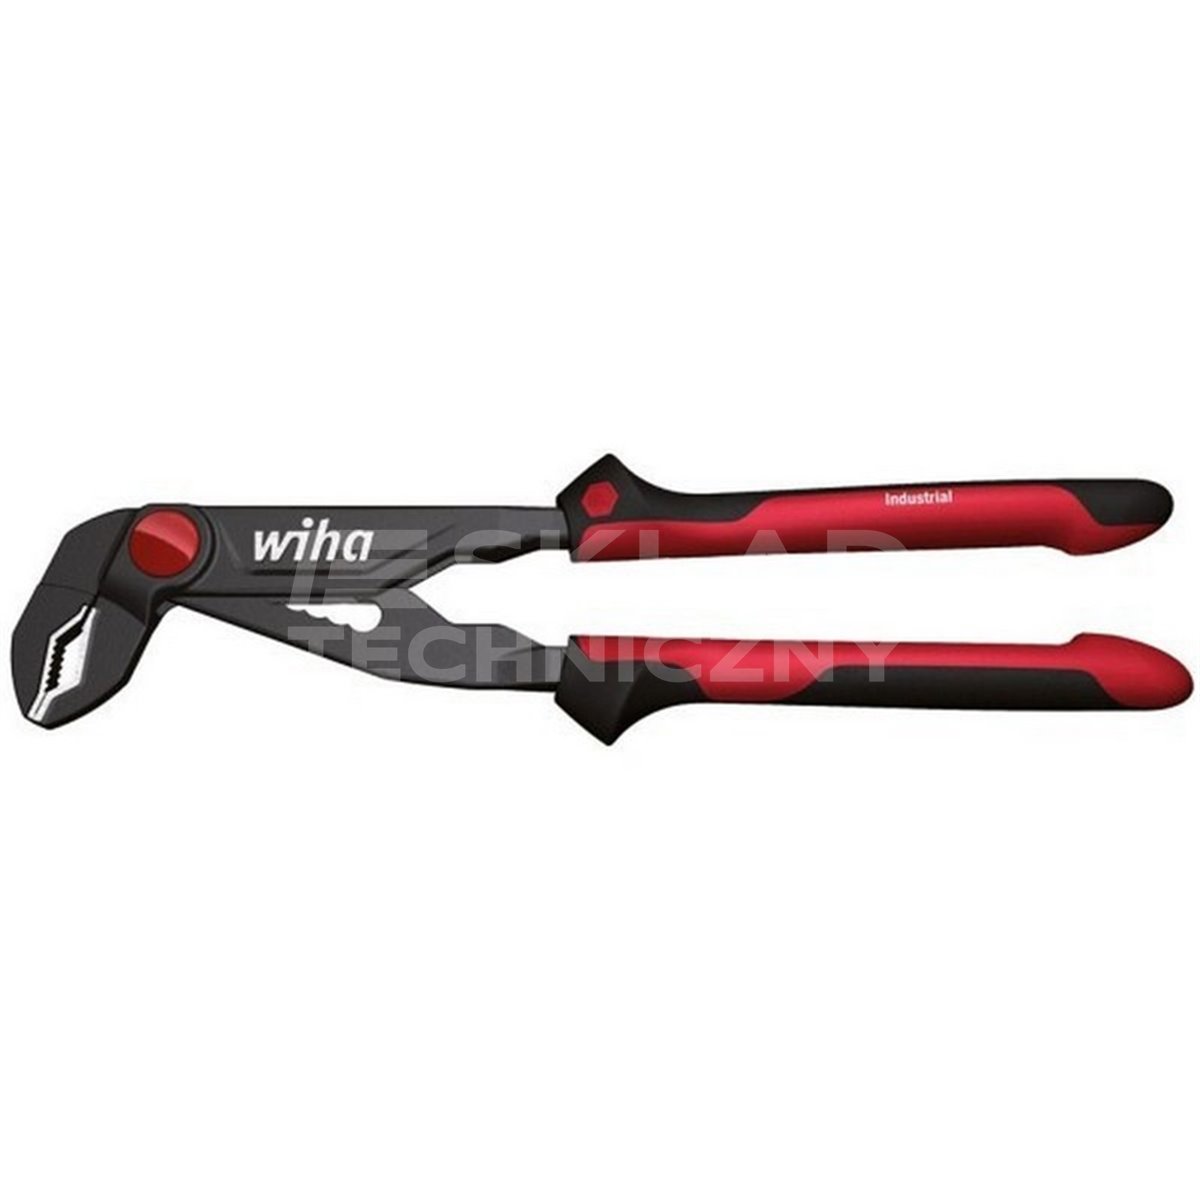 Adjustable pliers with button Industrial Z22002 300mm Wiha 36041.